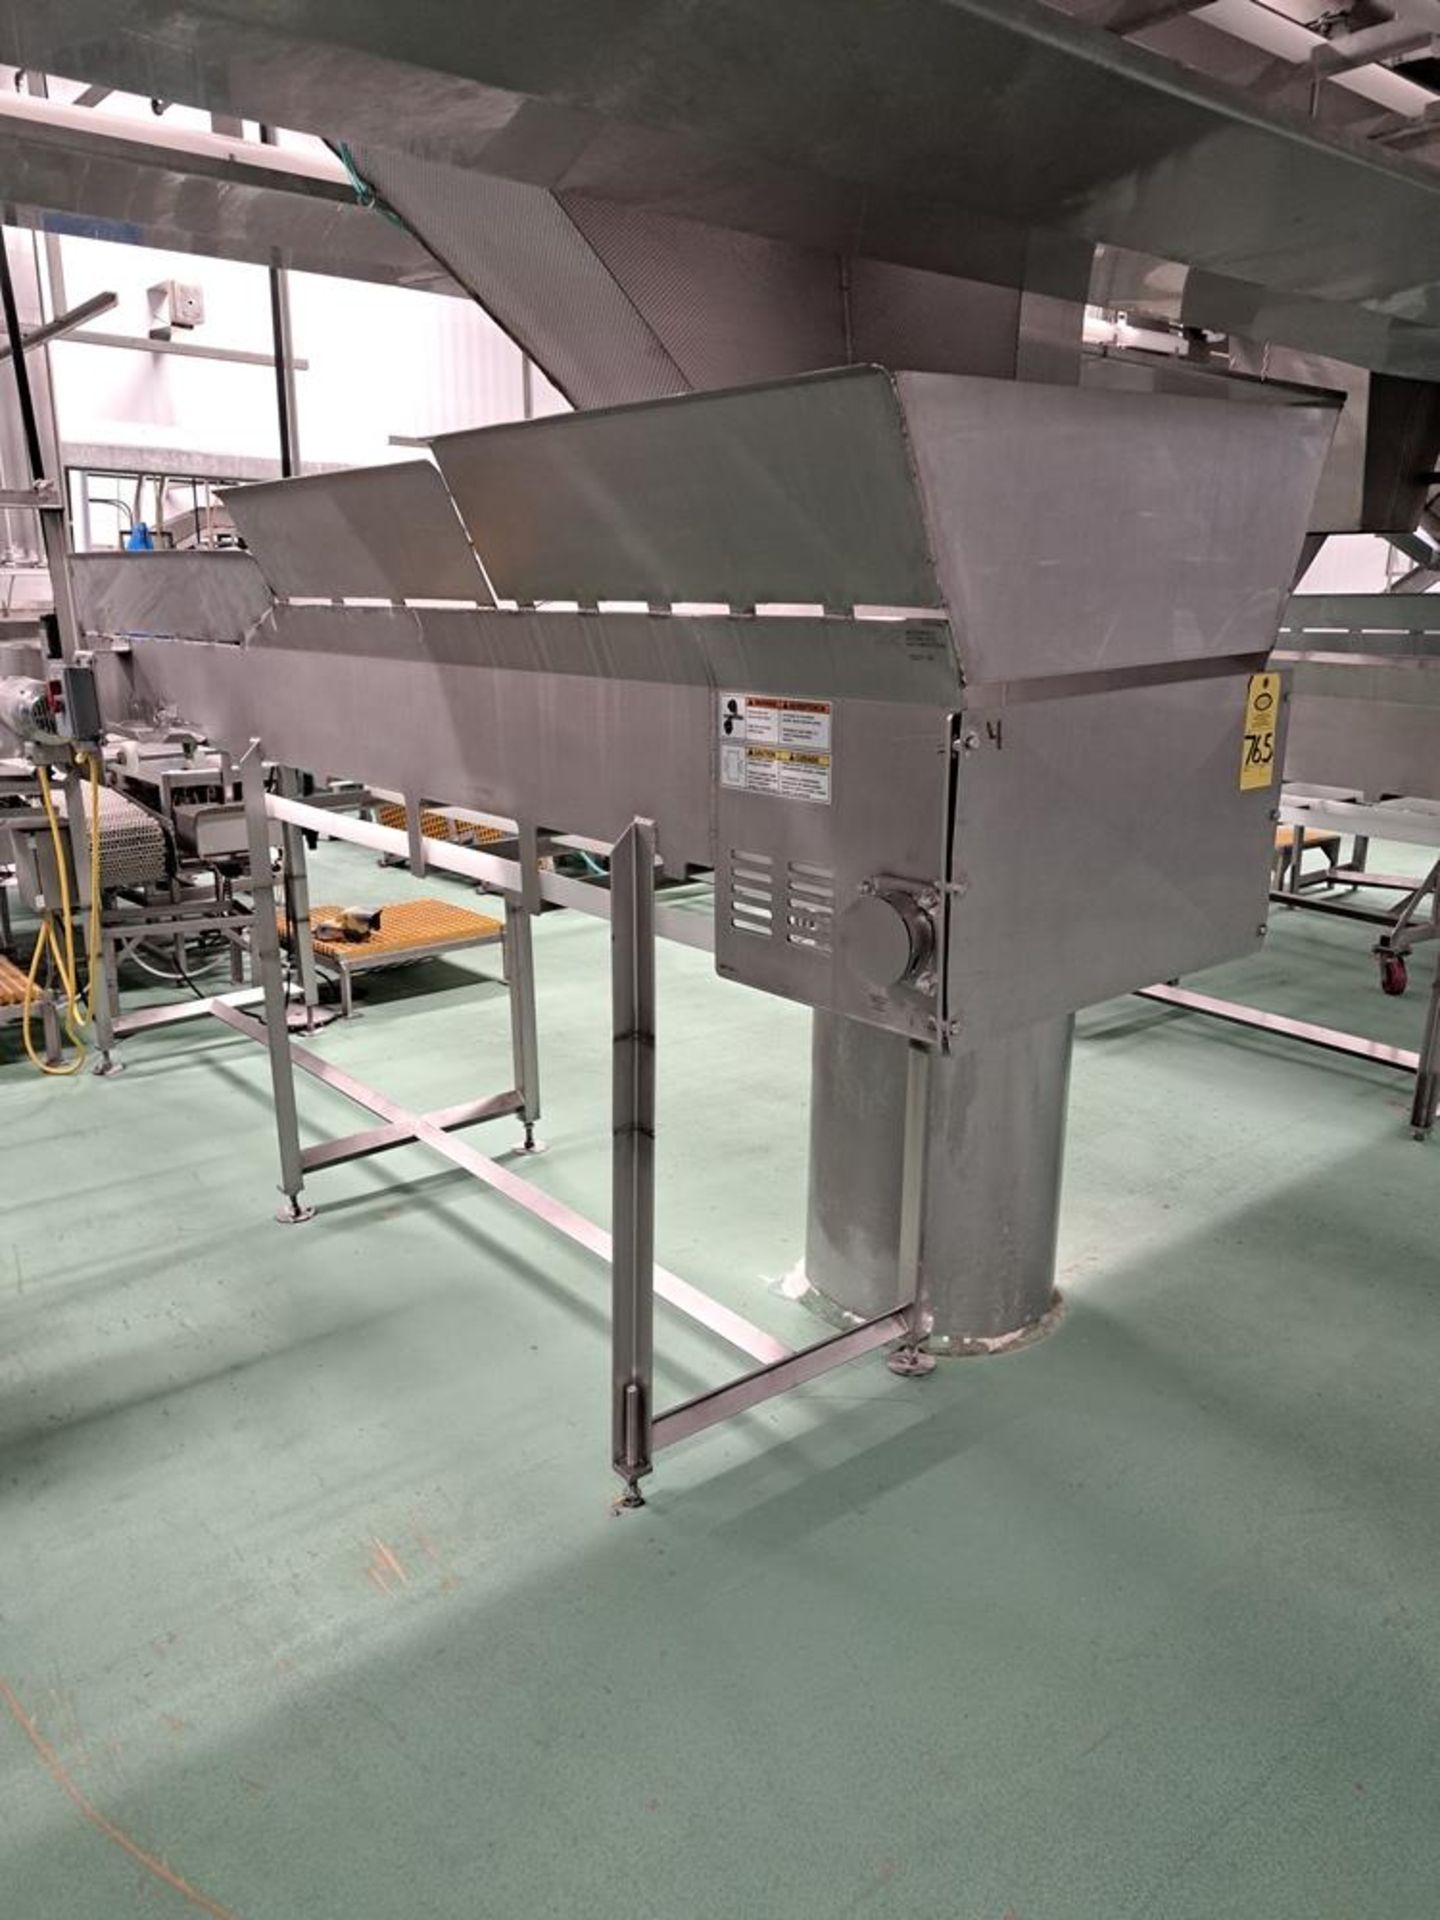 Stainless Steel Conveyor, 24" W X 13' L, stainless steel motor, 230/460 volts: Required Loading